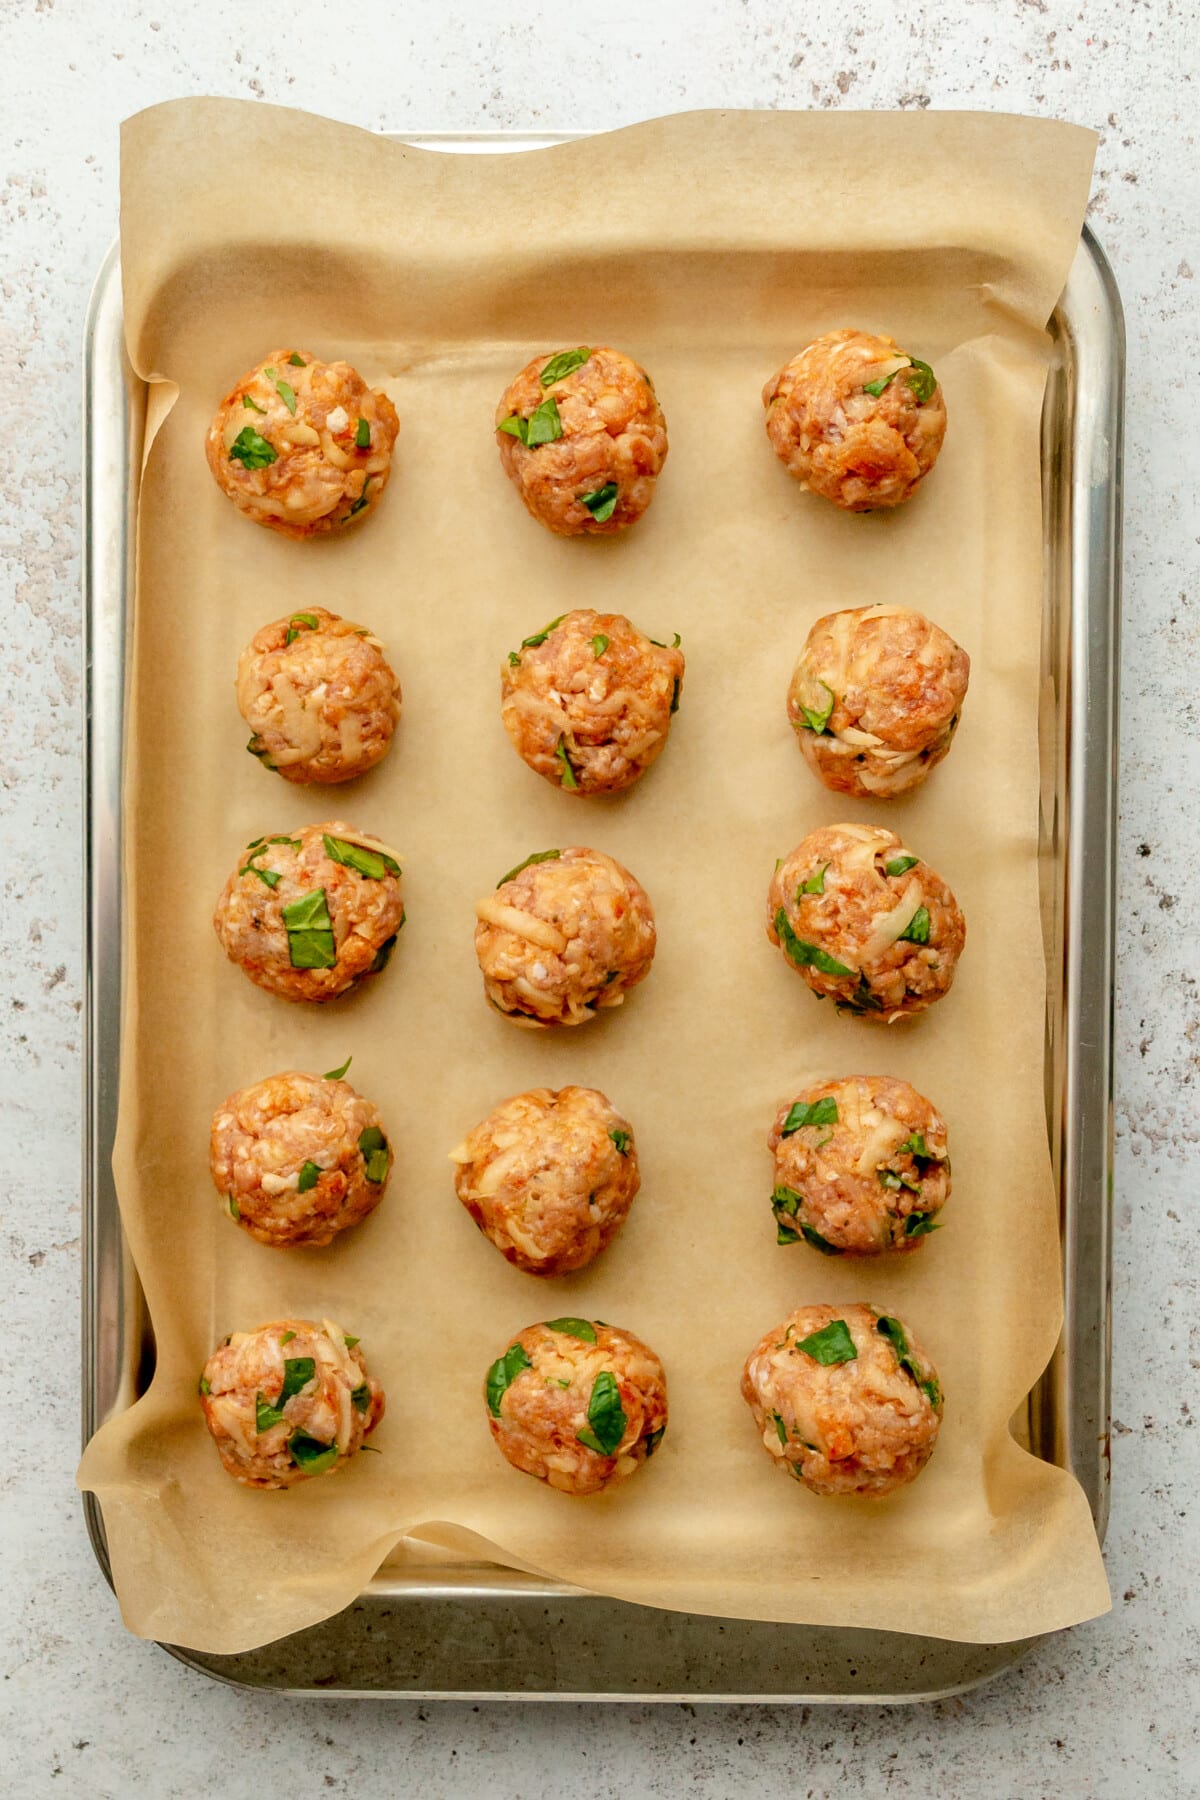 Raw chorizo potato meatballs sit on a lined and rimmed stainless steel tray on a light grey surface.